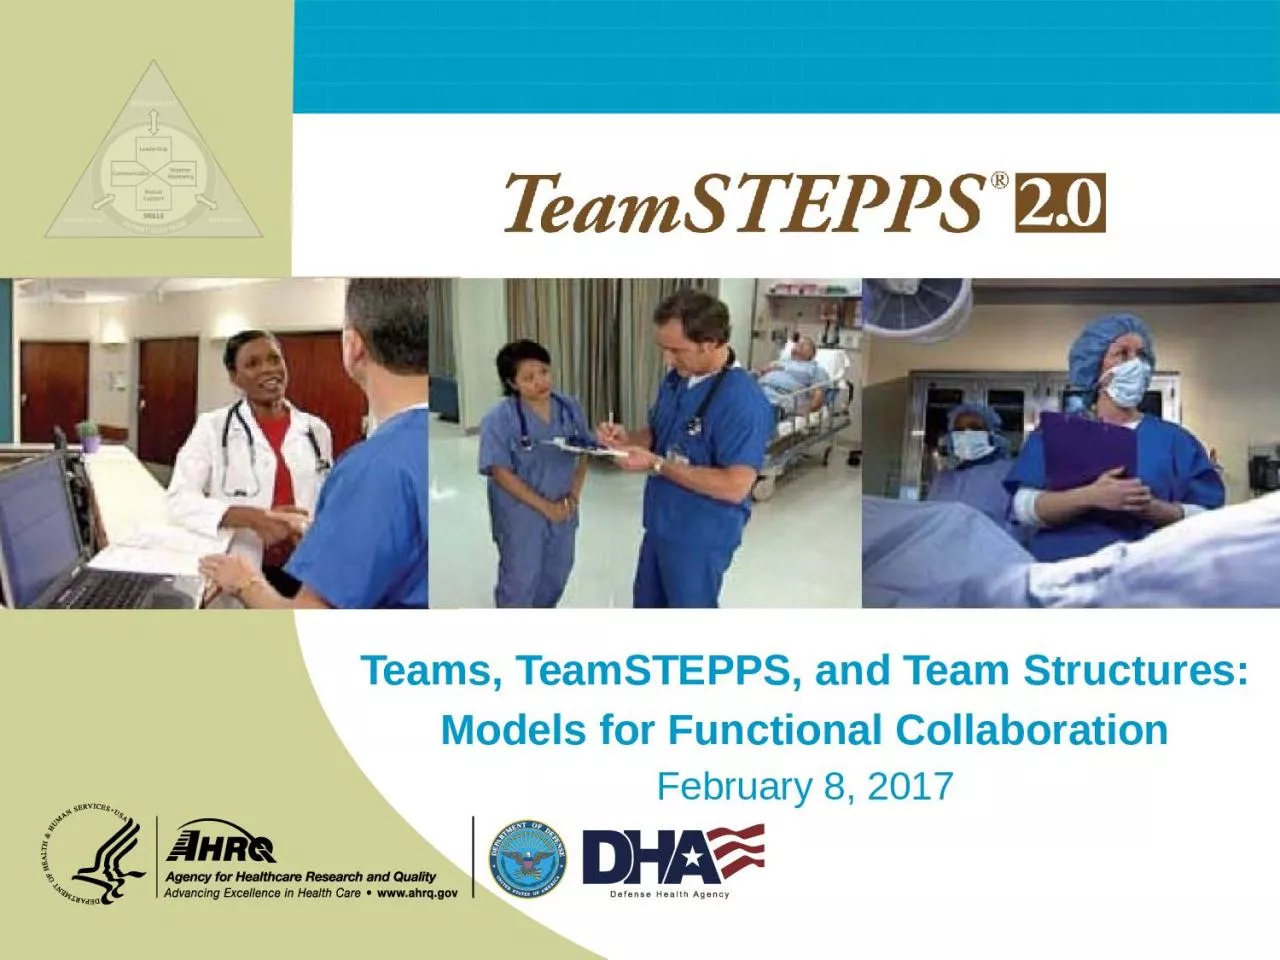 Teams, TeamSTEPPS, and Team Structures: